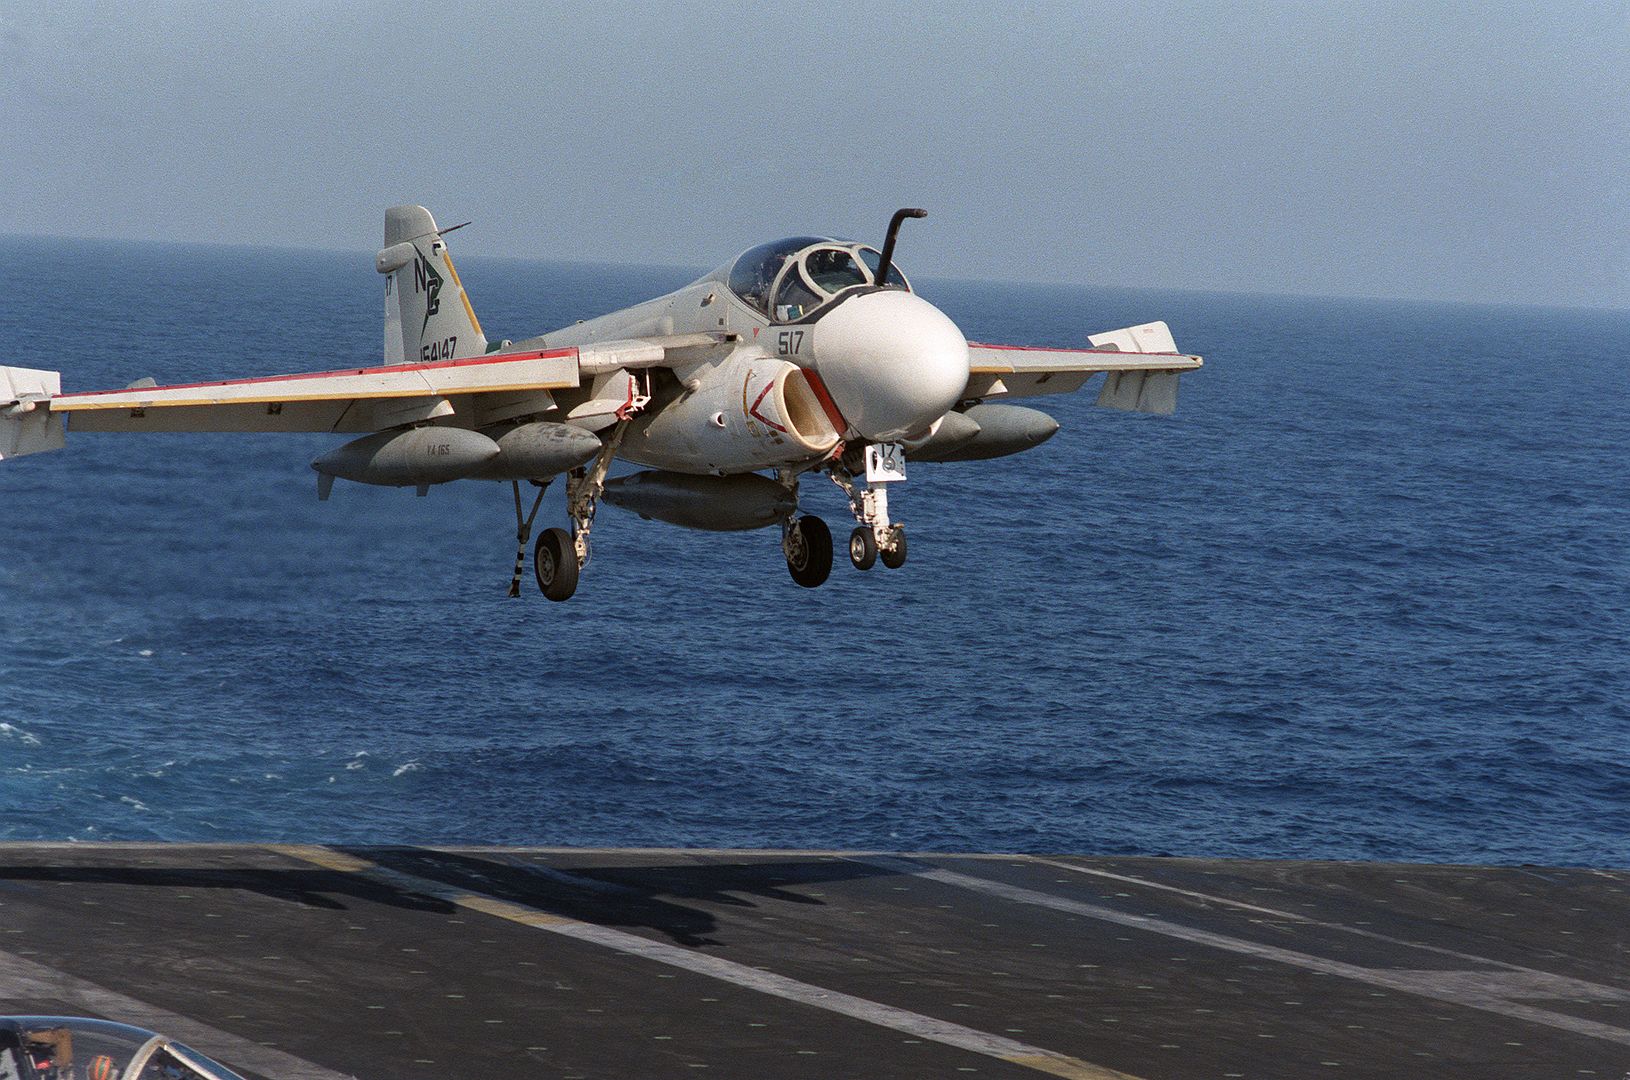 An Attack Squadron 165 KA 6D Intruder Aircraft Prepares To Land Aboard The Aircraft Carrier USS KITTY HAWK